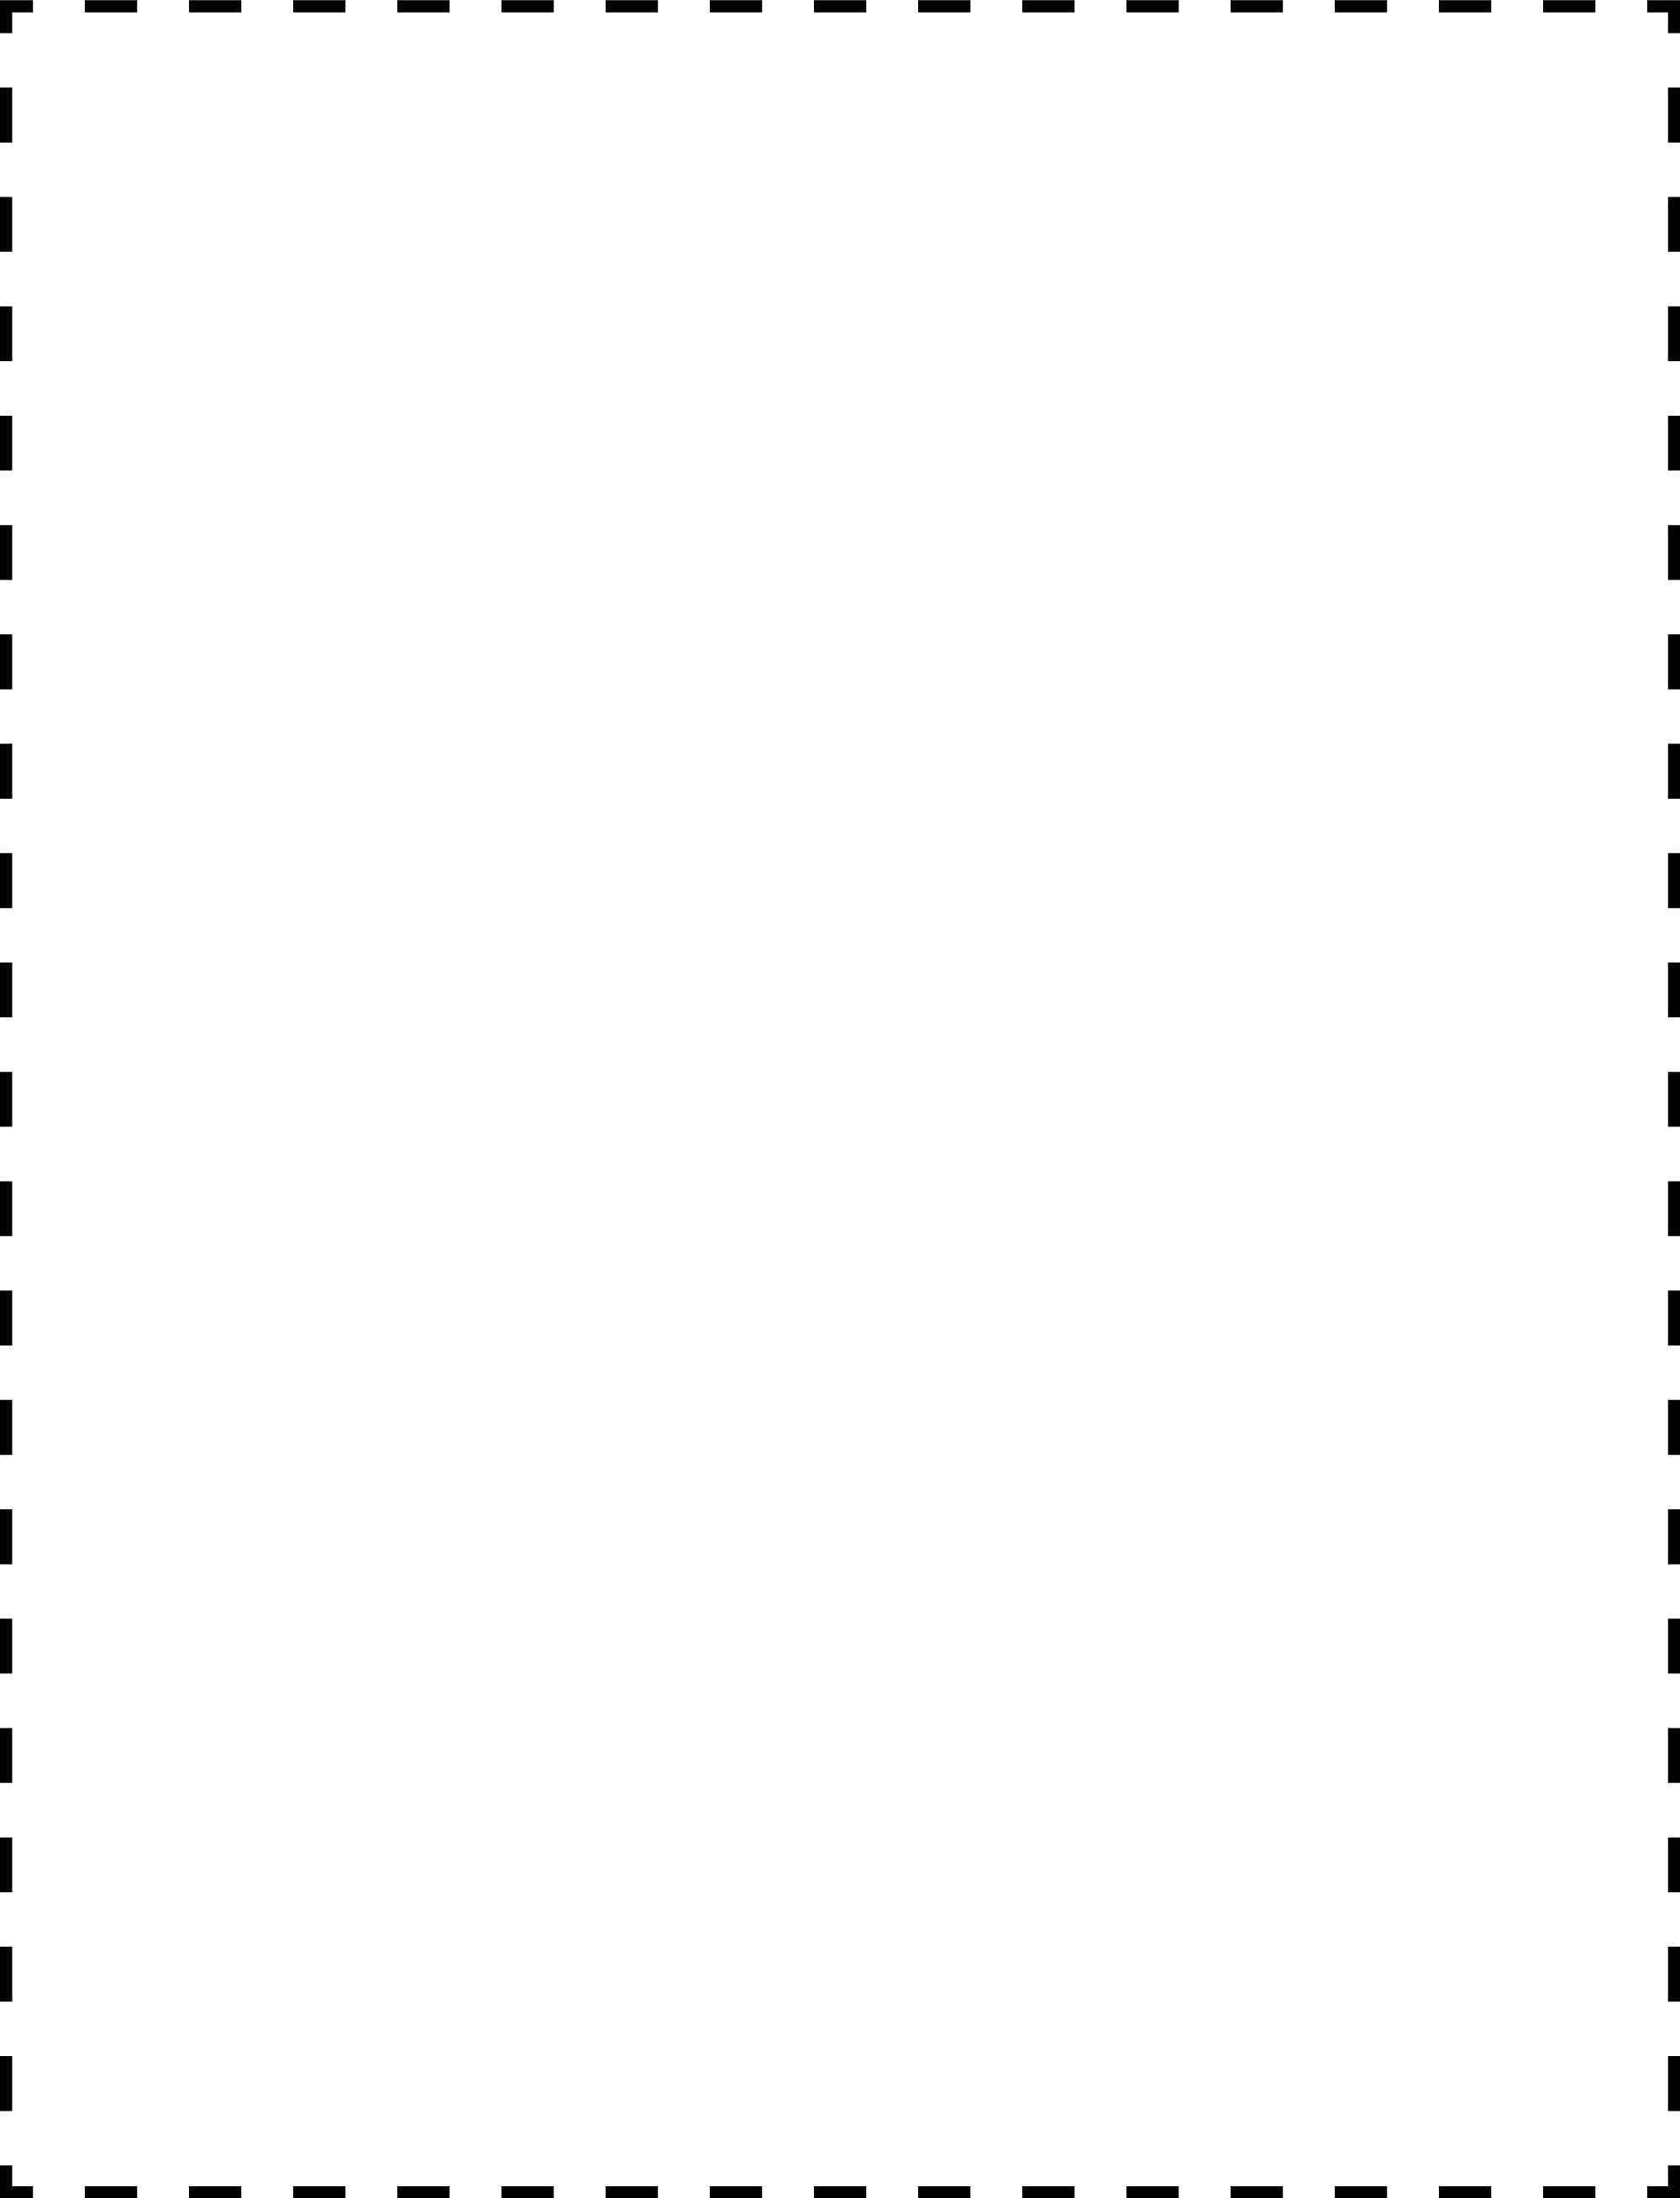 620-2037-coupon-outline-4x5-k.png